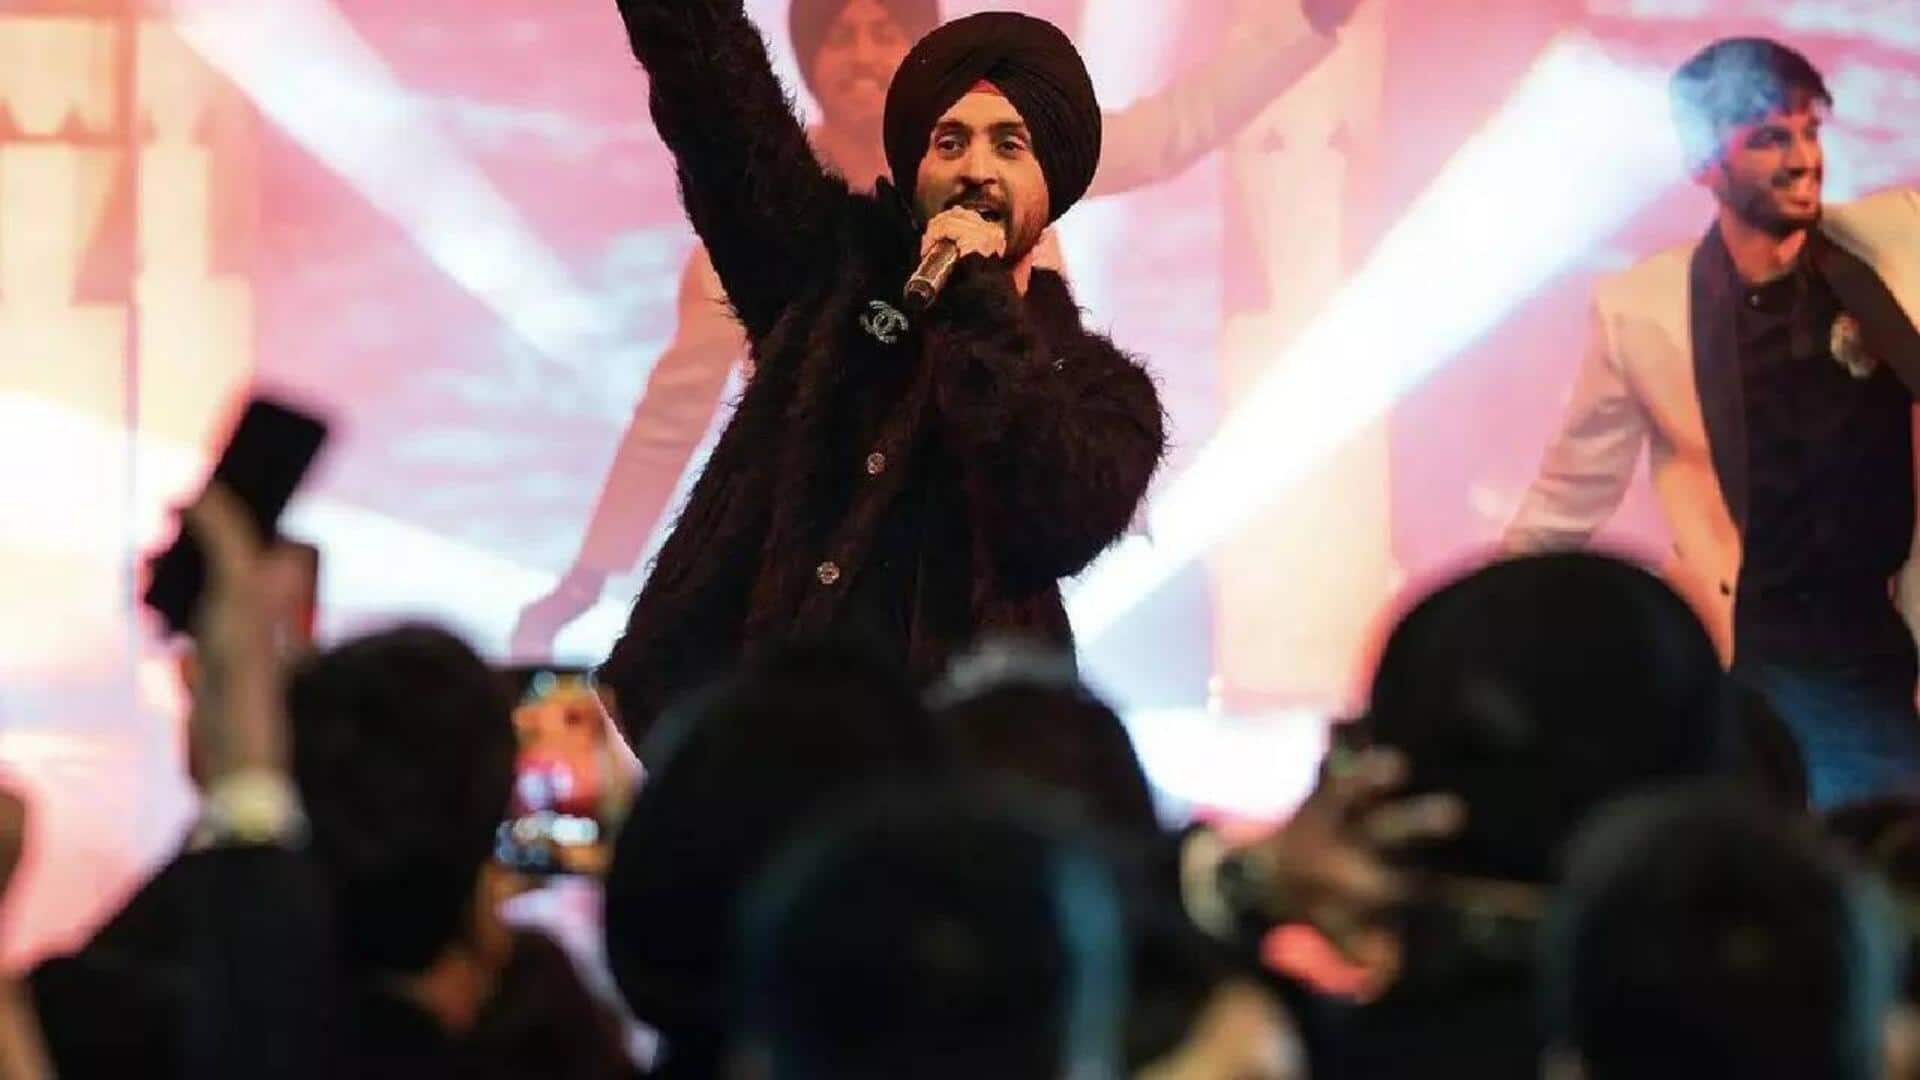 New Jersey Governor commends Diljit Dosanjh for sold-out concert